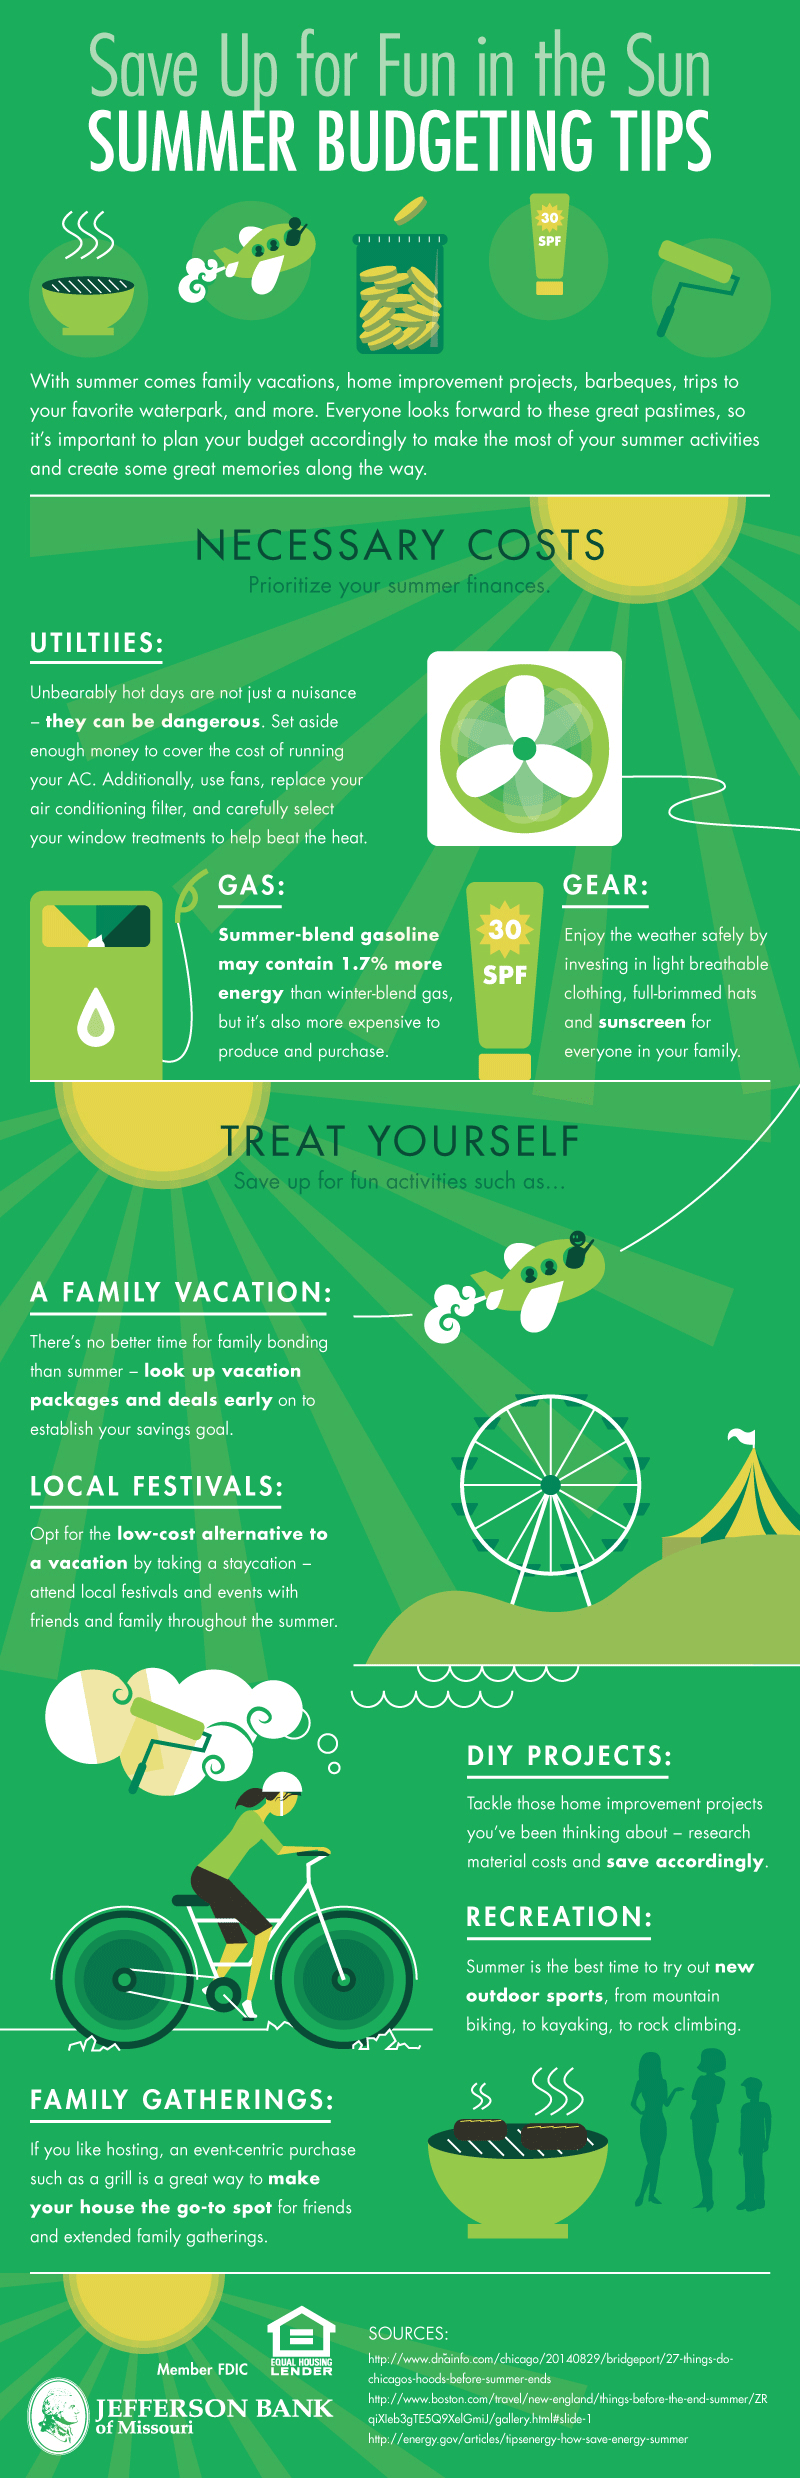 An infographic outlining ways you can save on unnecessary costs this summer while still having tons of fun